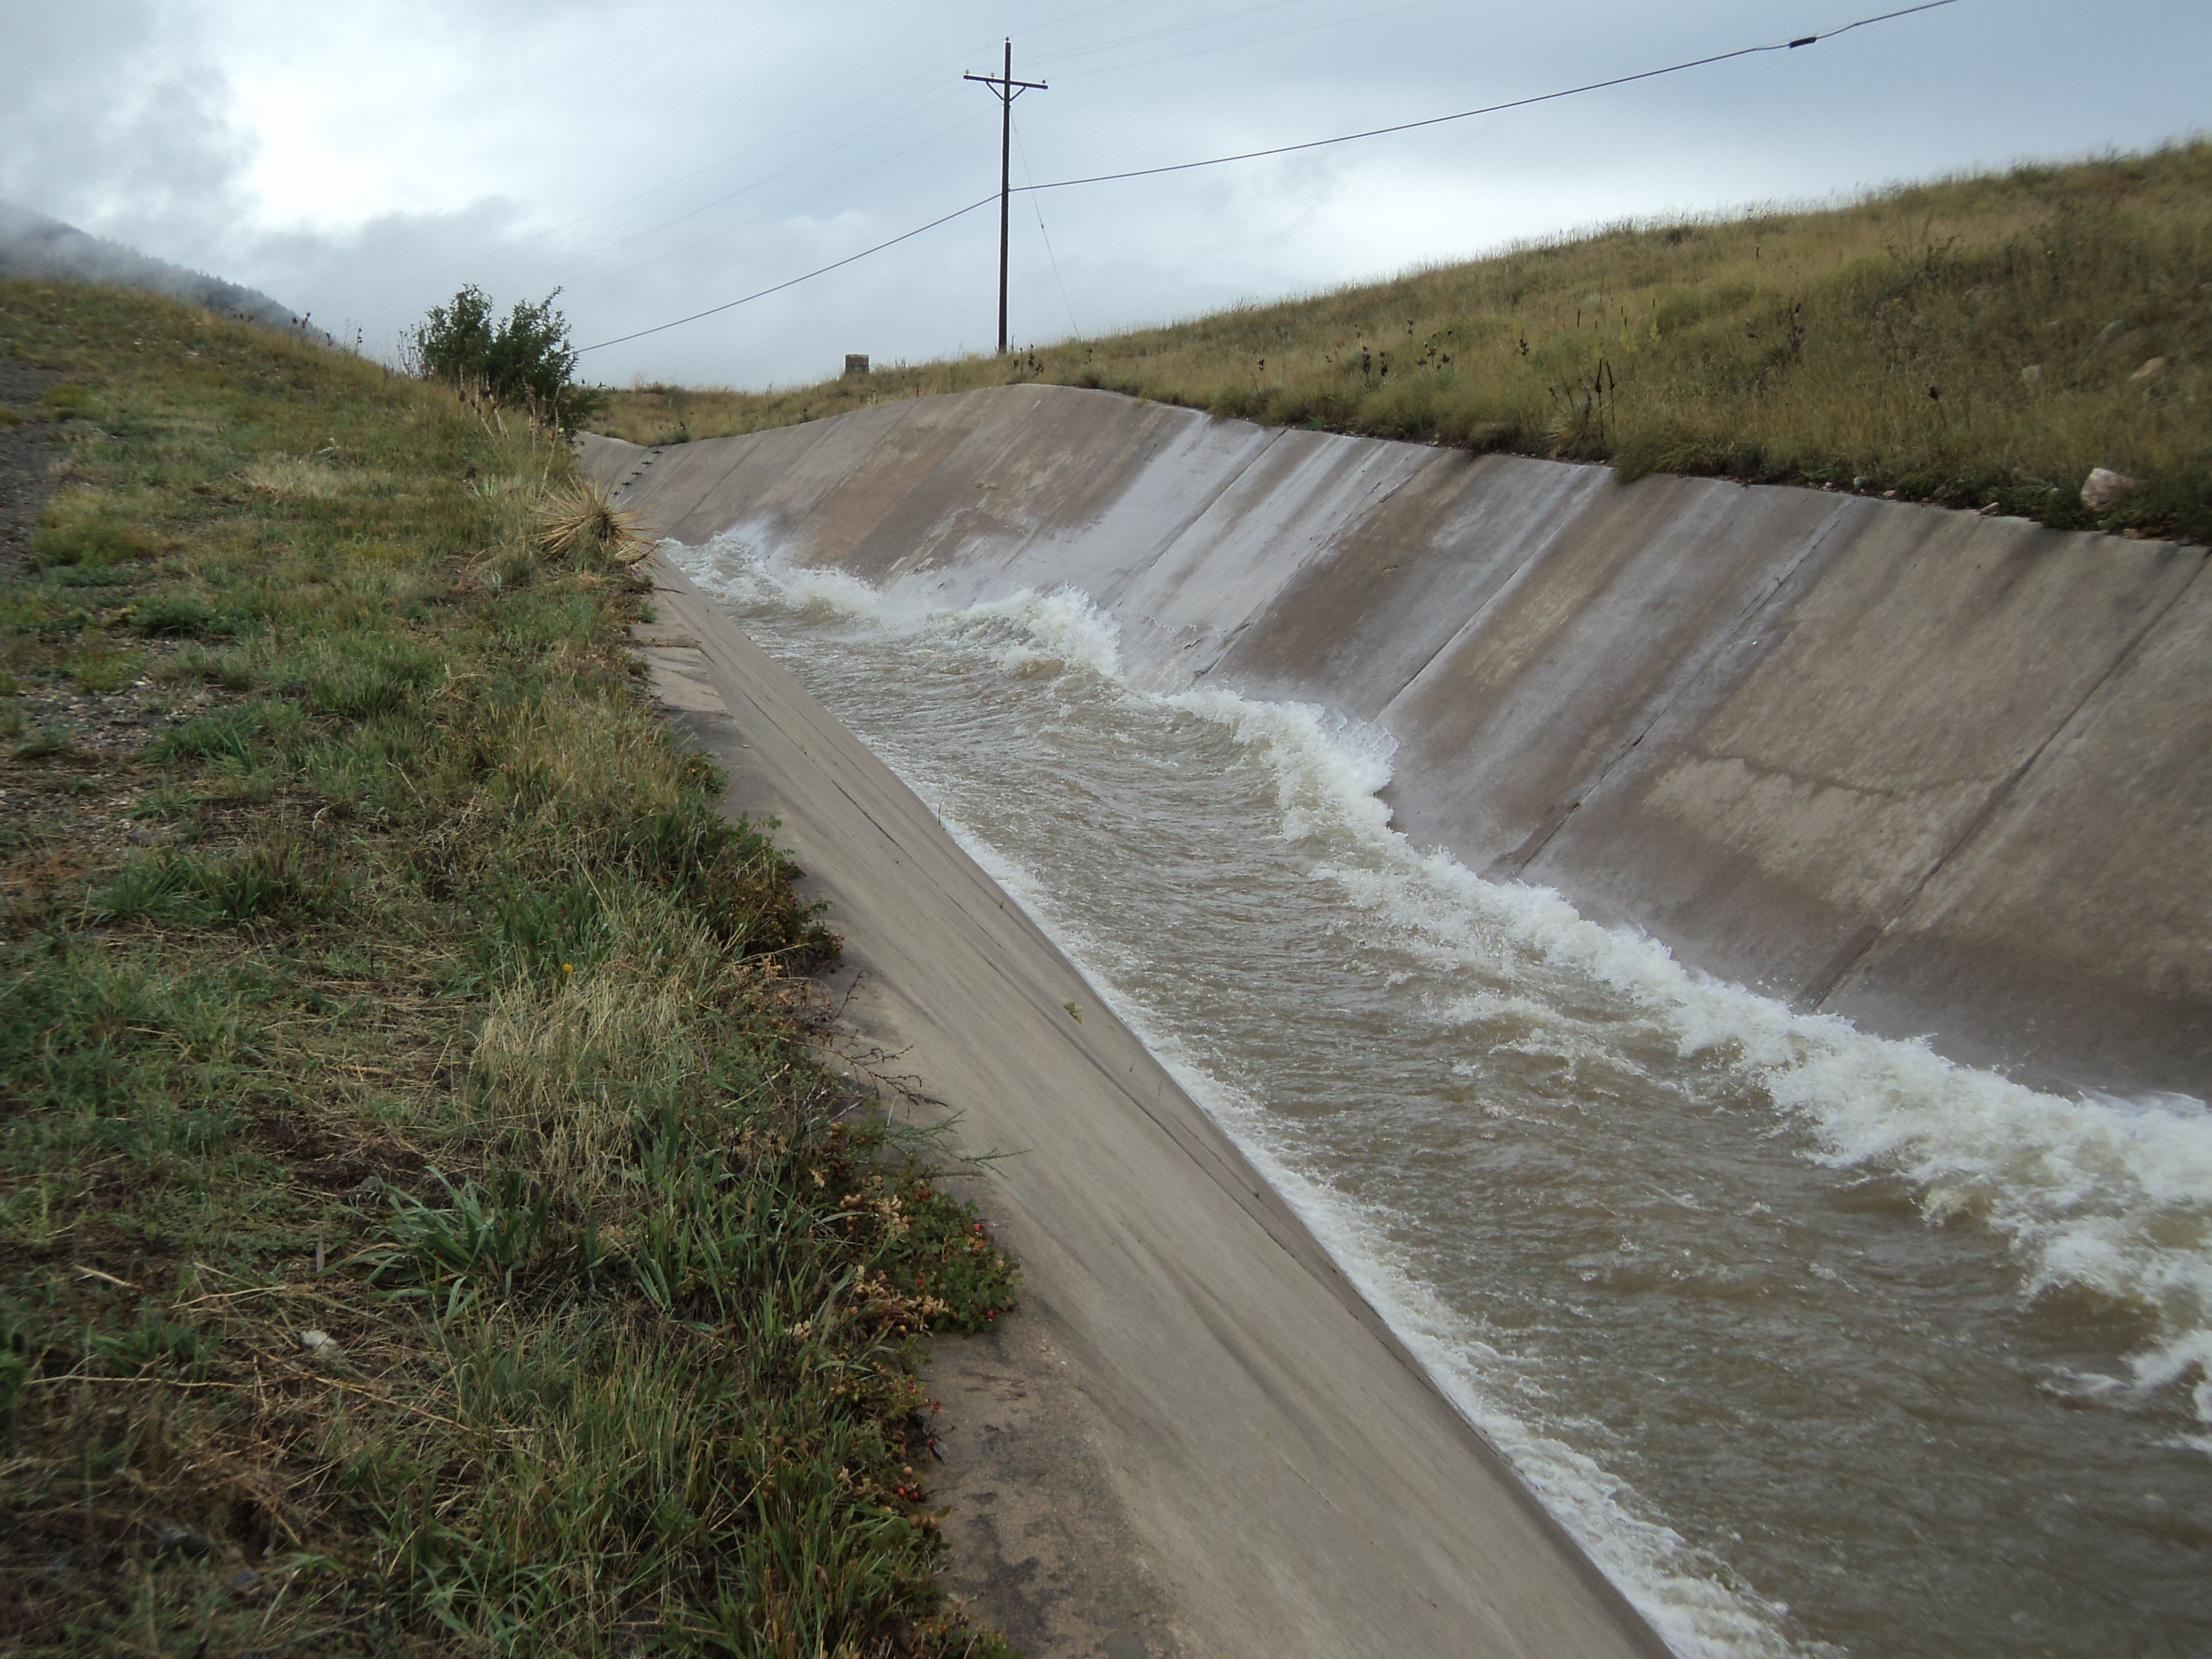 Water rushes down Ralston's spillway.